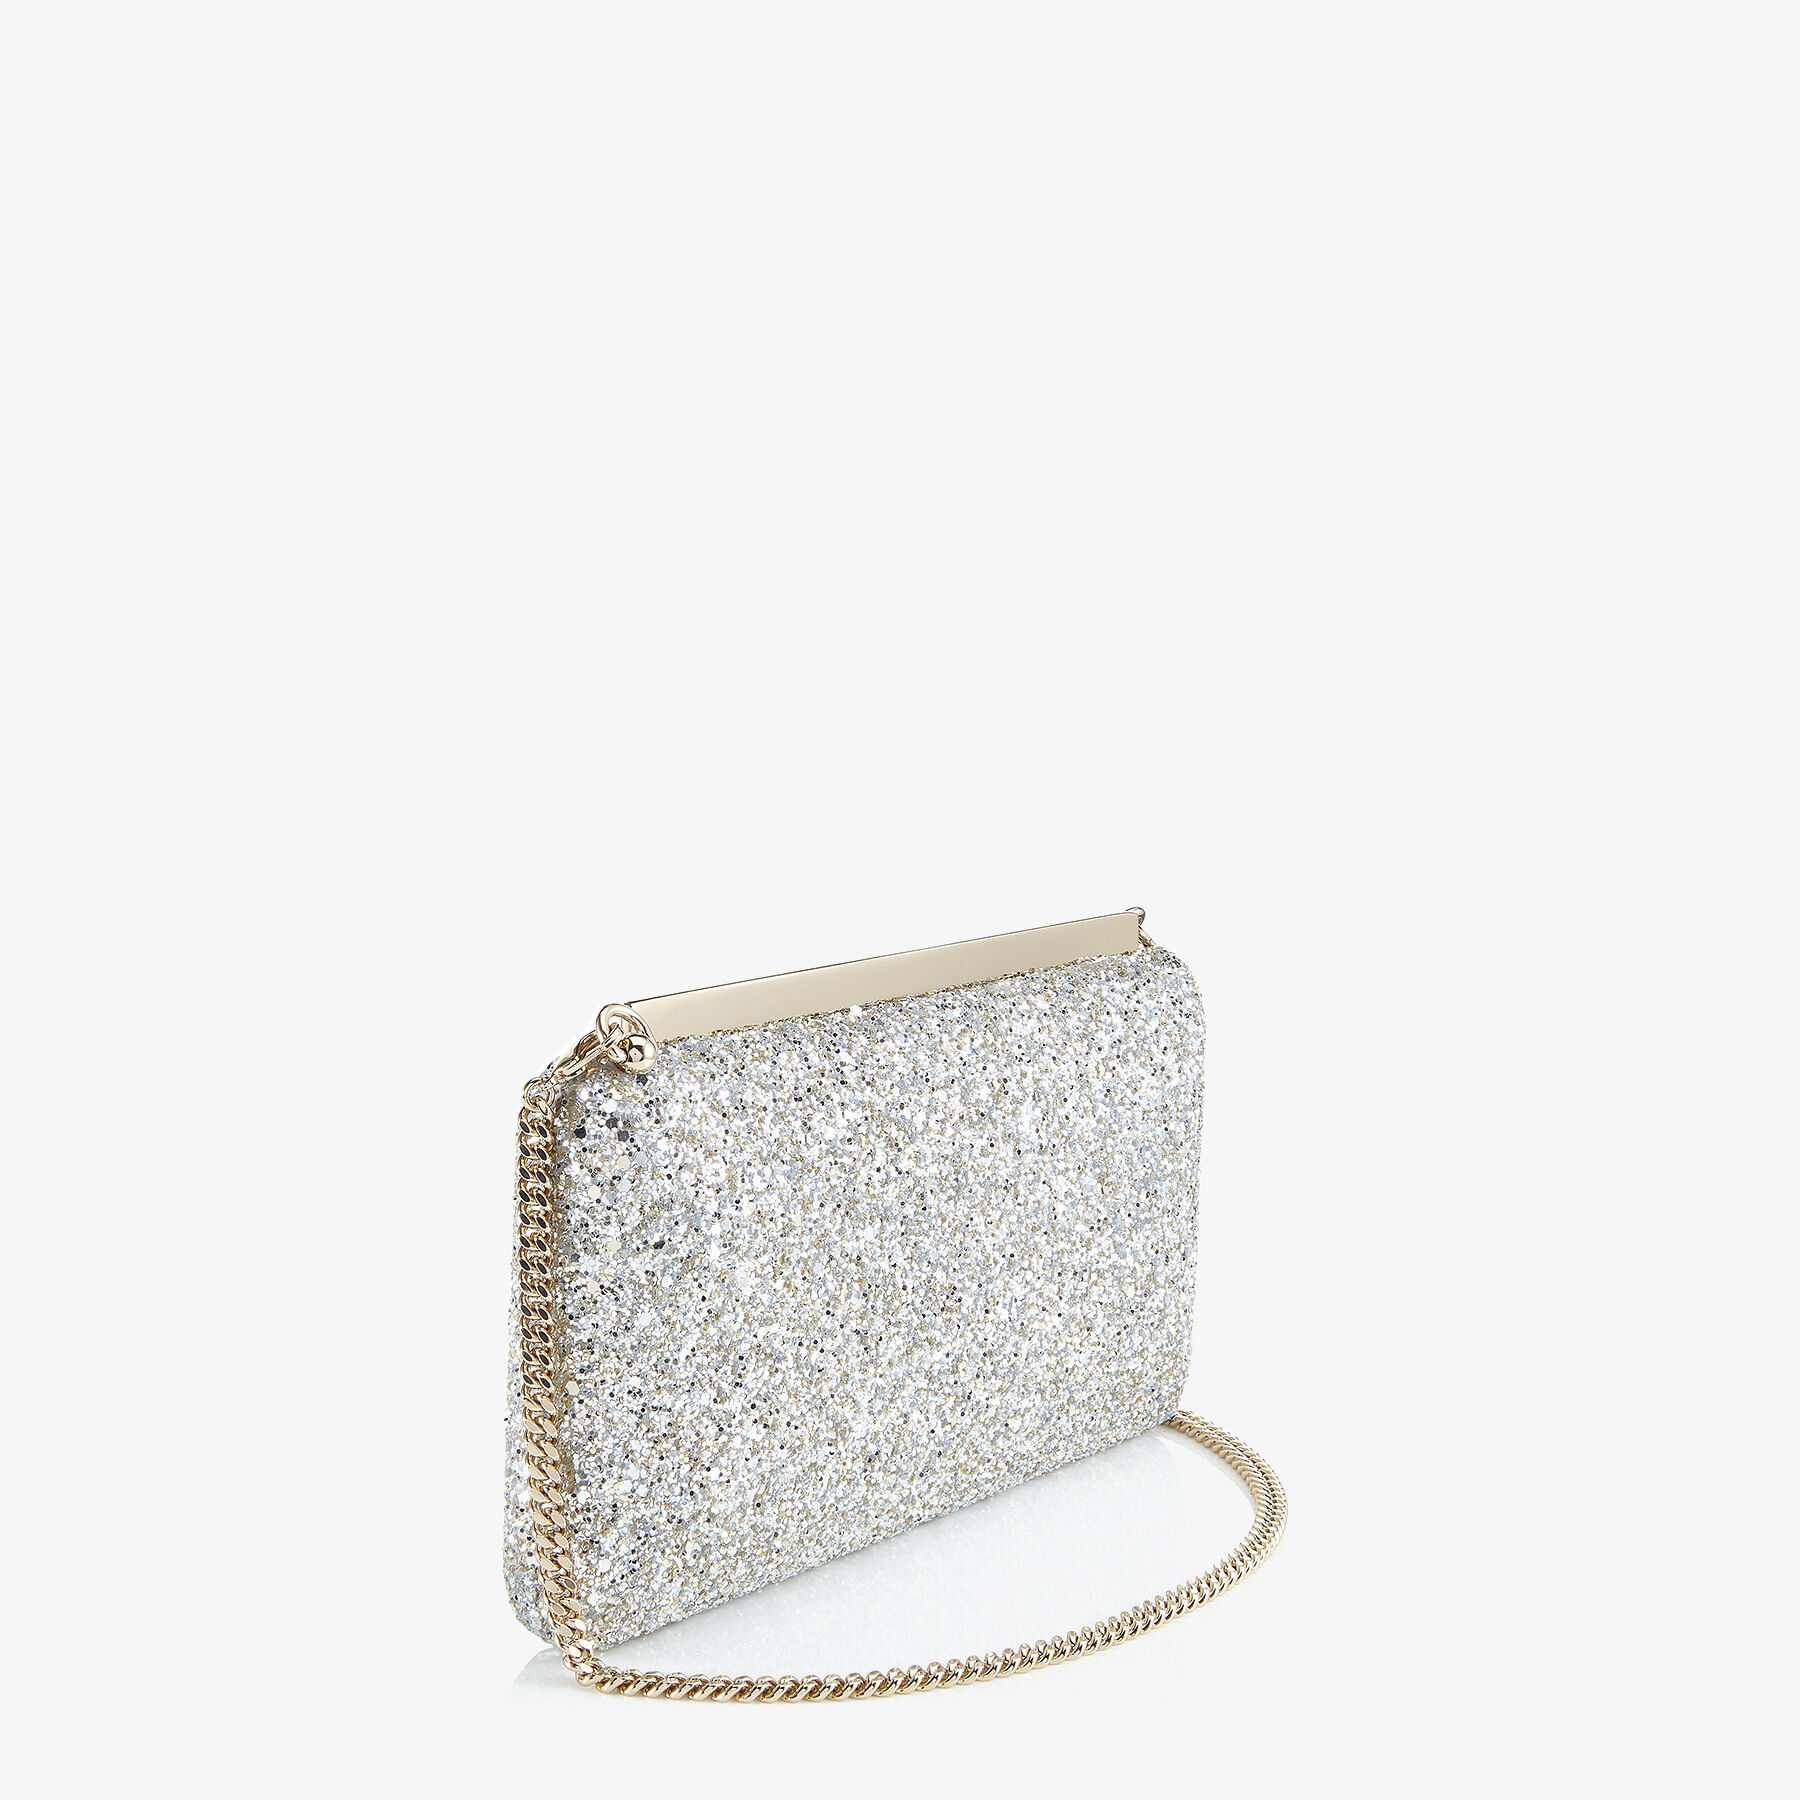 Champagne Gold Evening Bag Floral Glitter Fabric